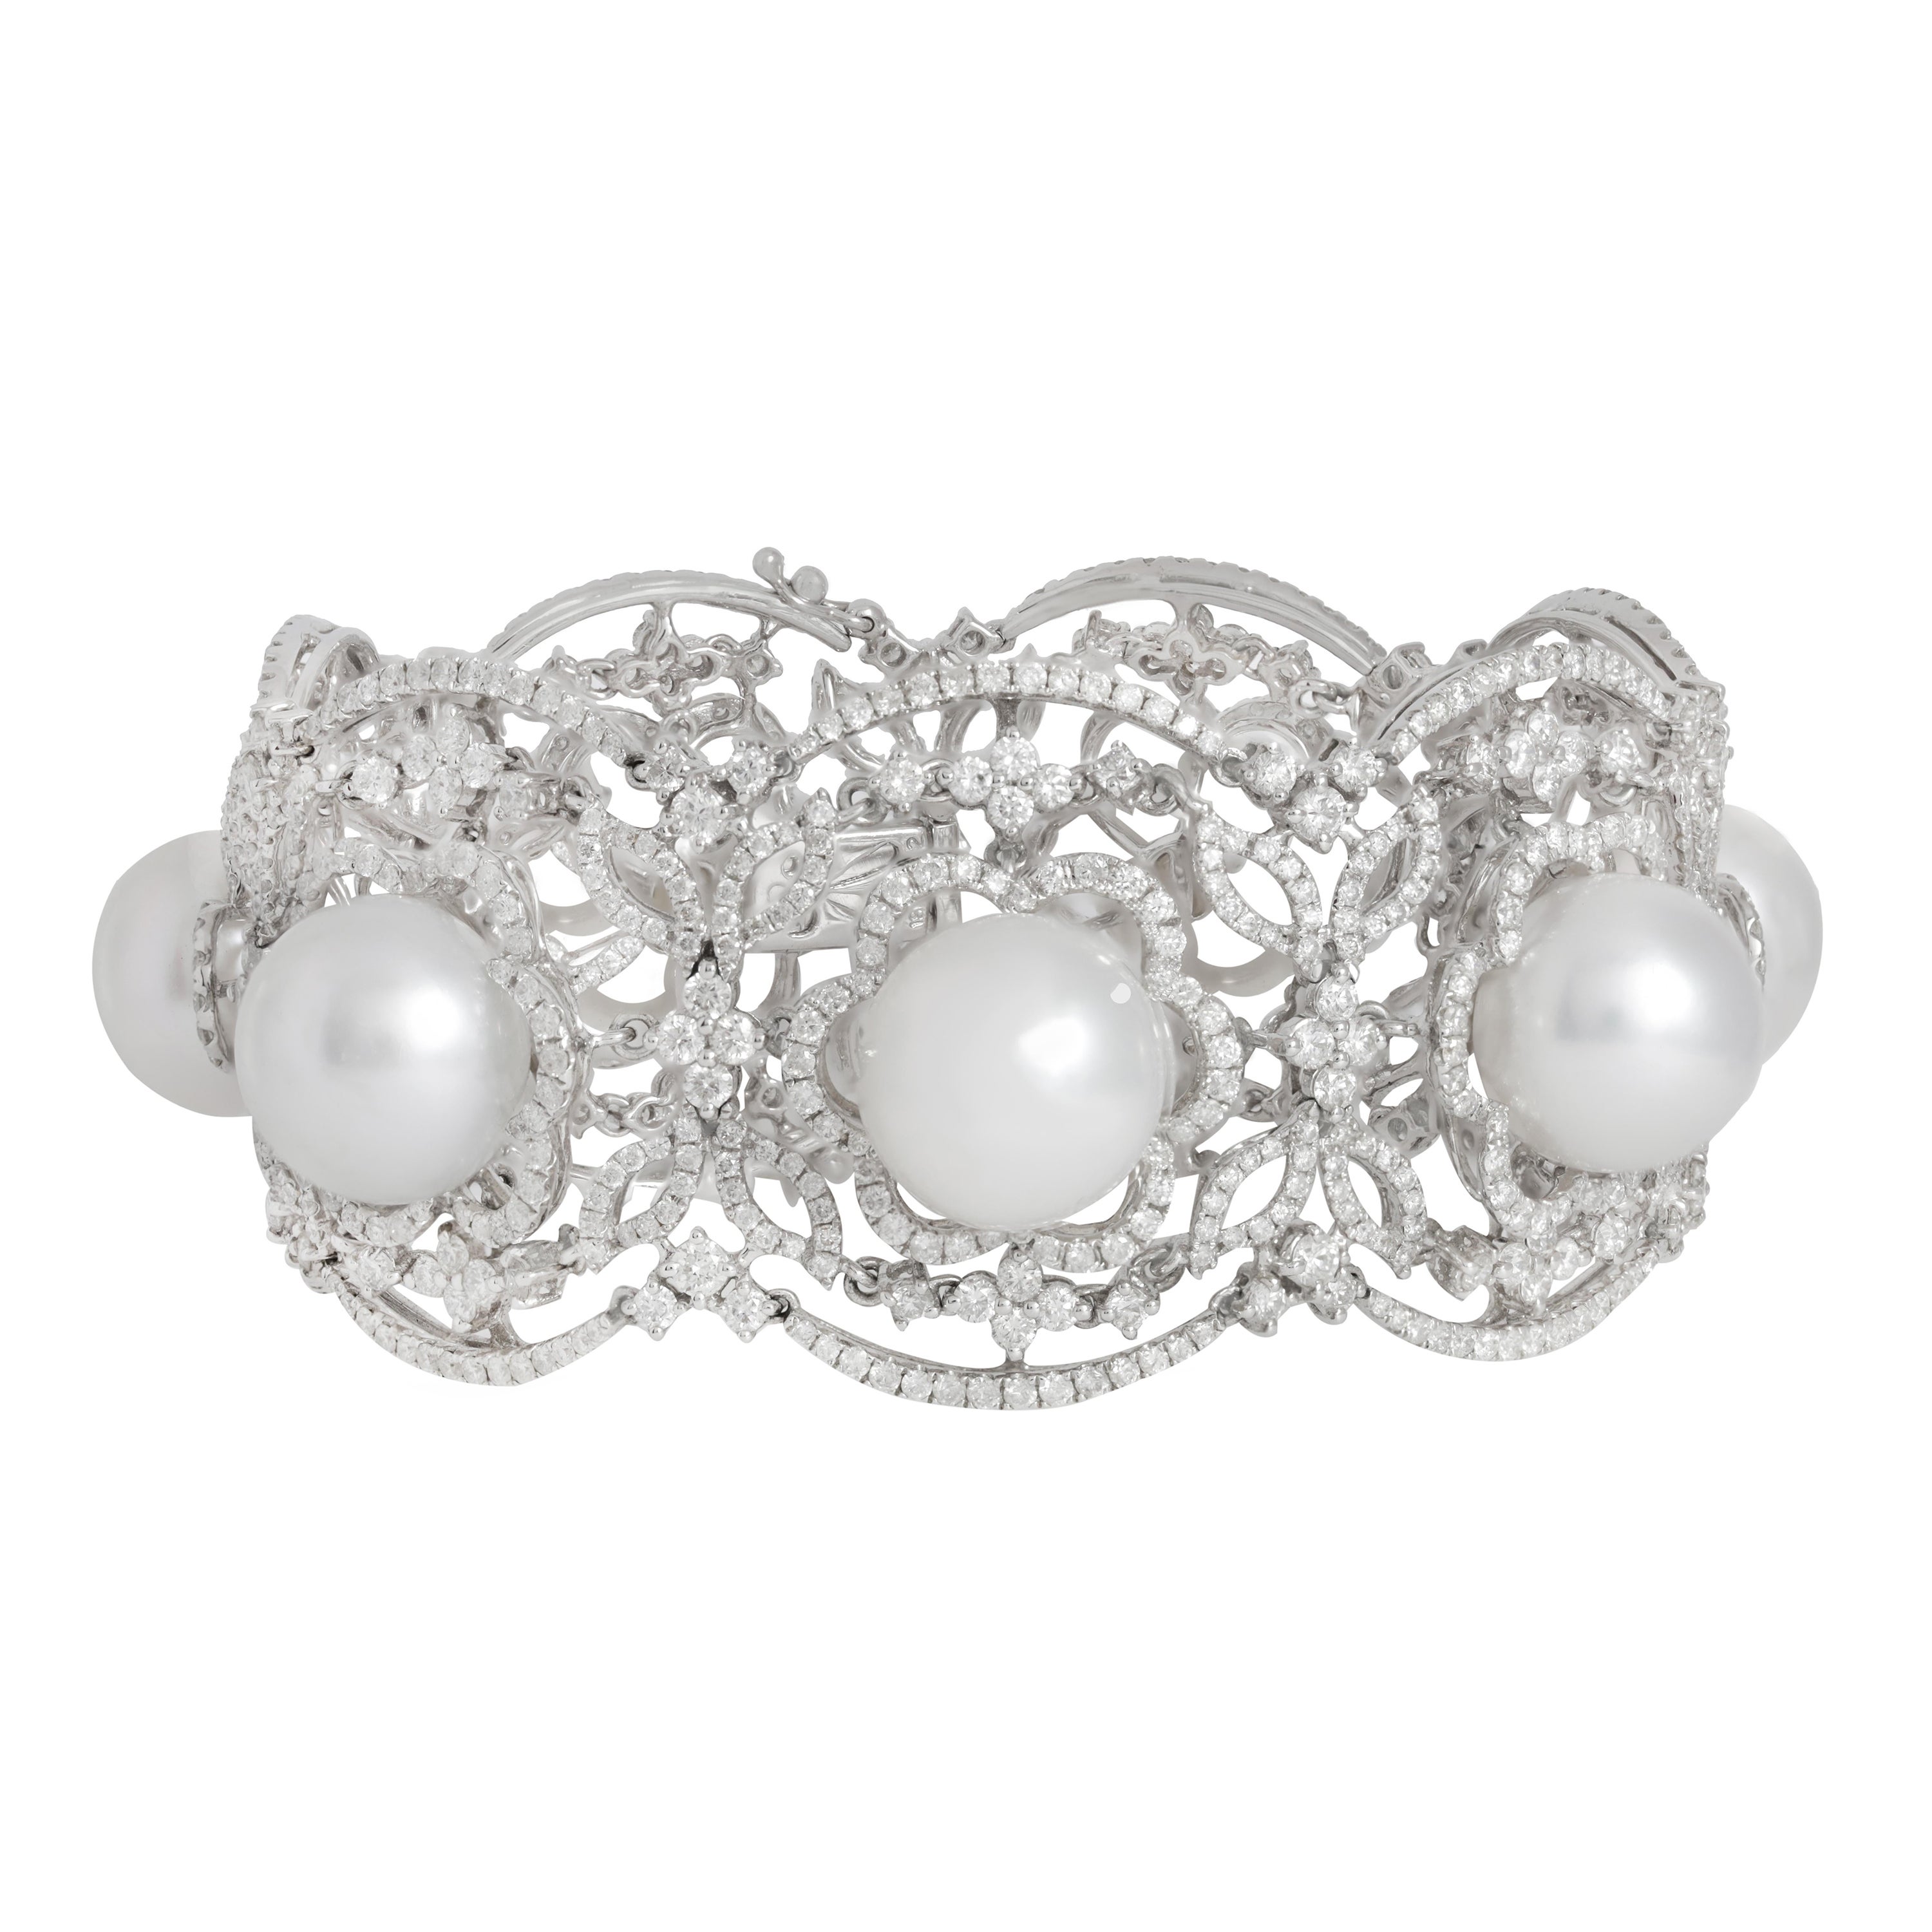 Diana M. 18 kt white gold diamond and pearl fashion bracelet adorned with 13.5 